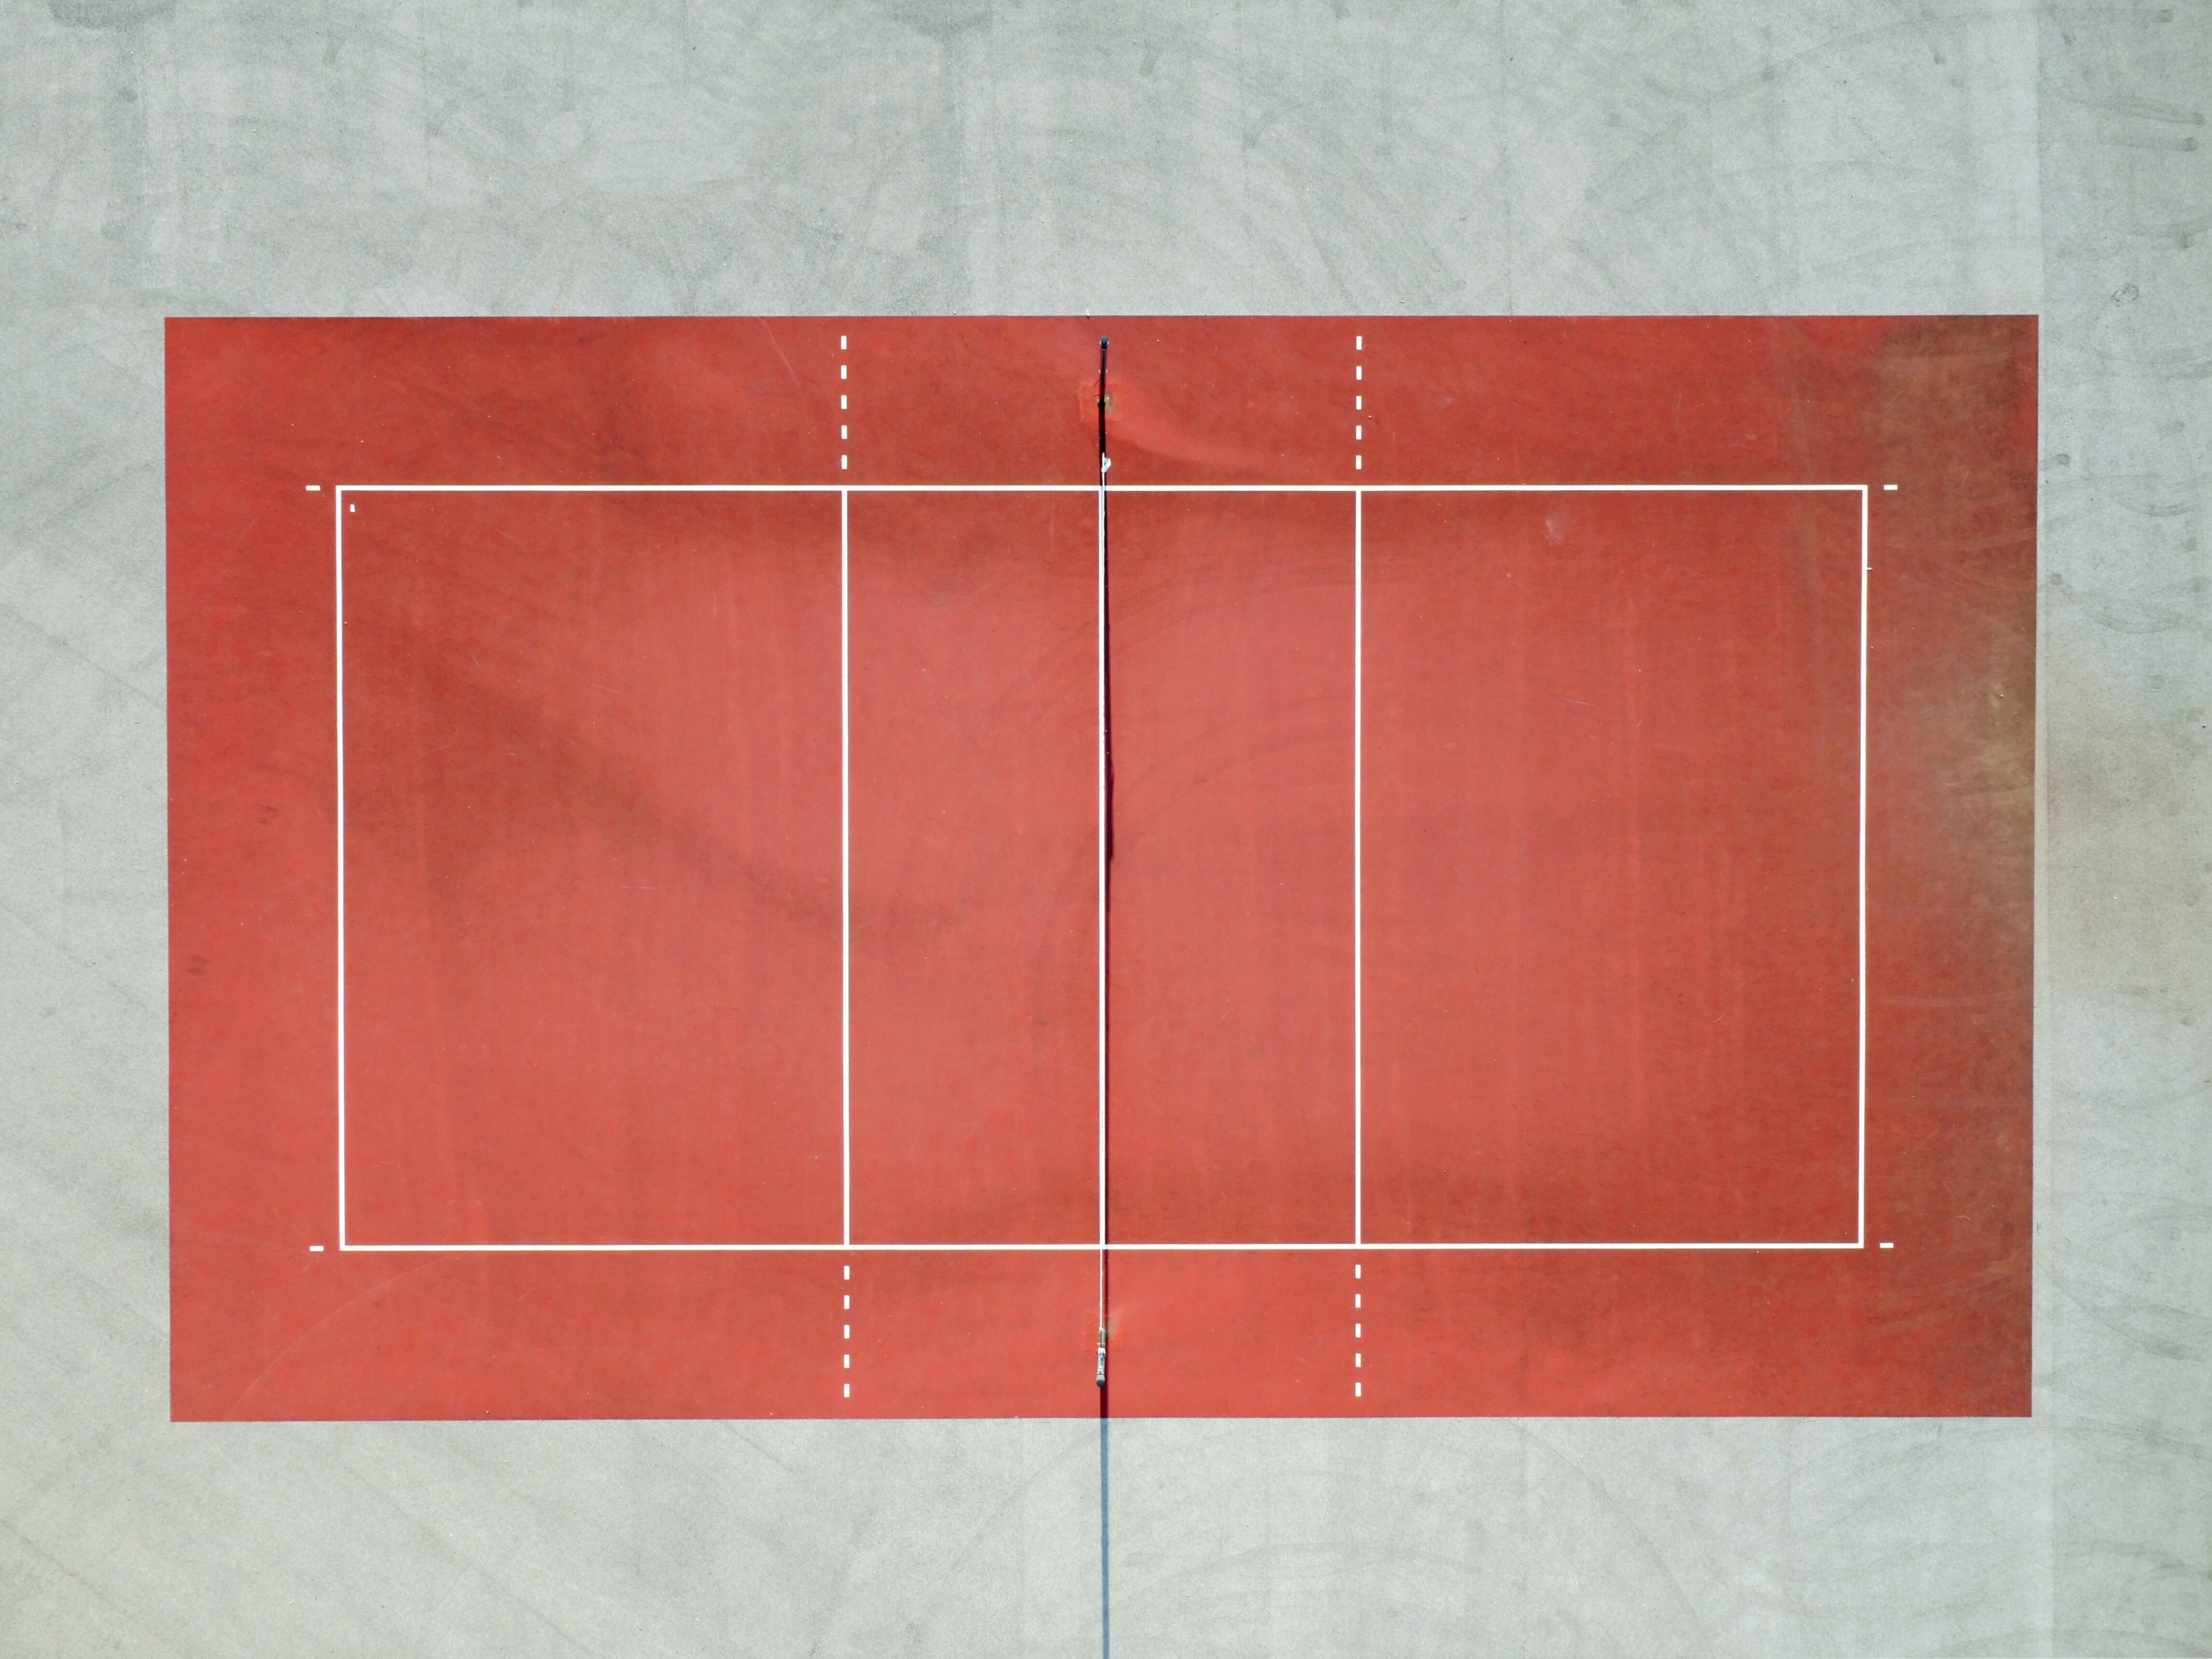 A red sports court viewed from above with a net in the middle and white surroundings.